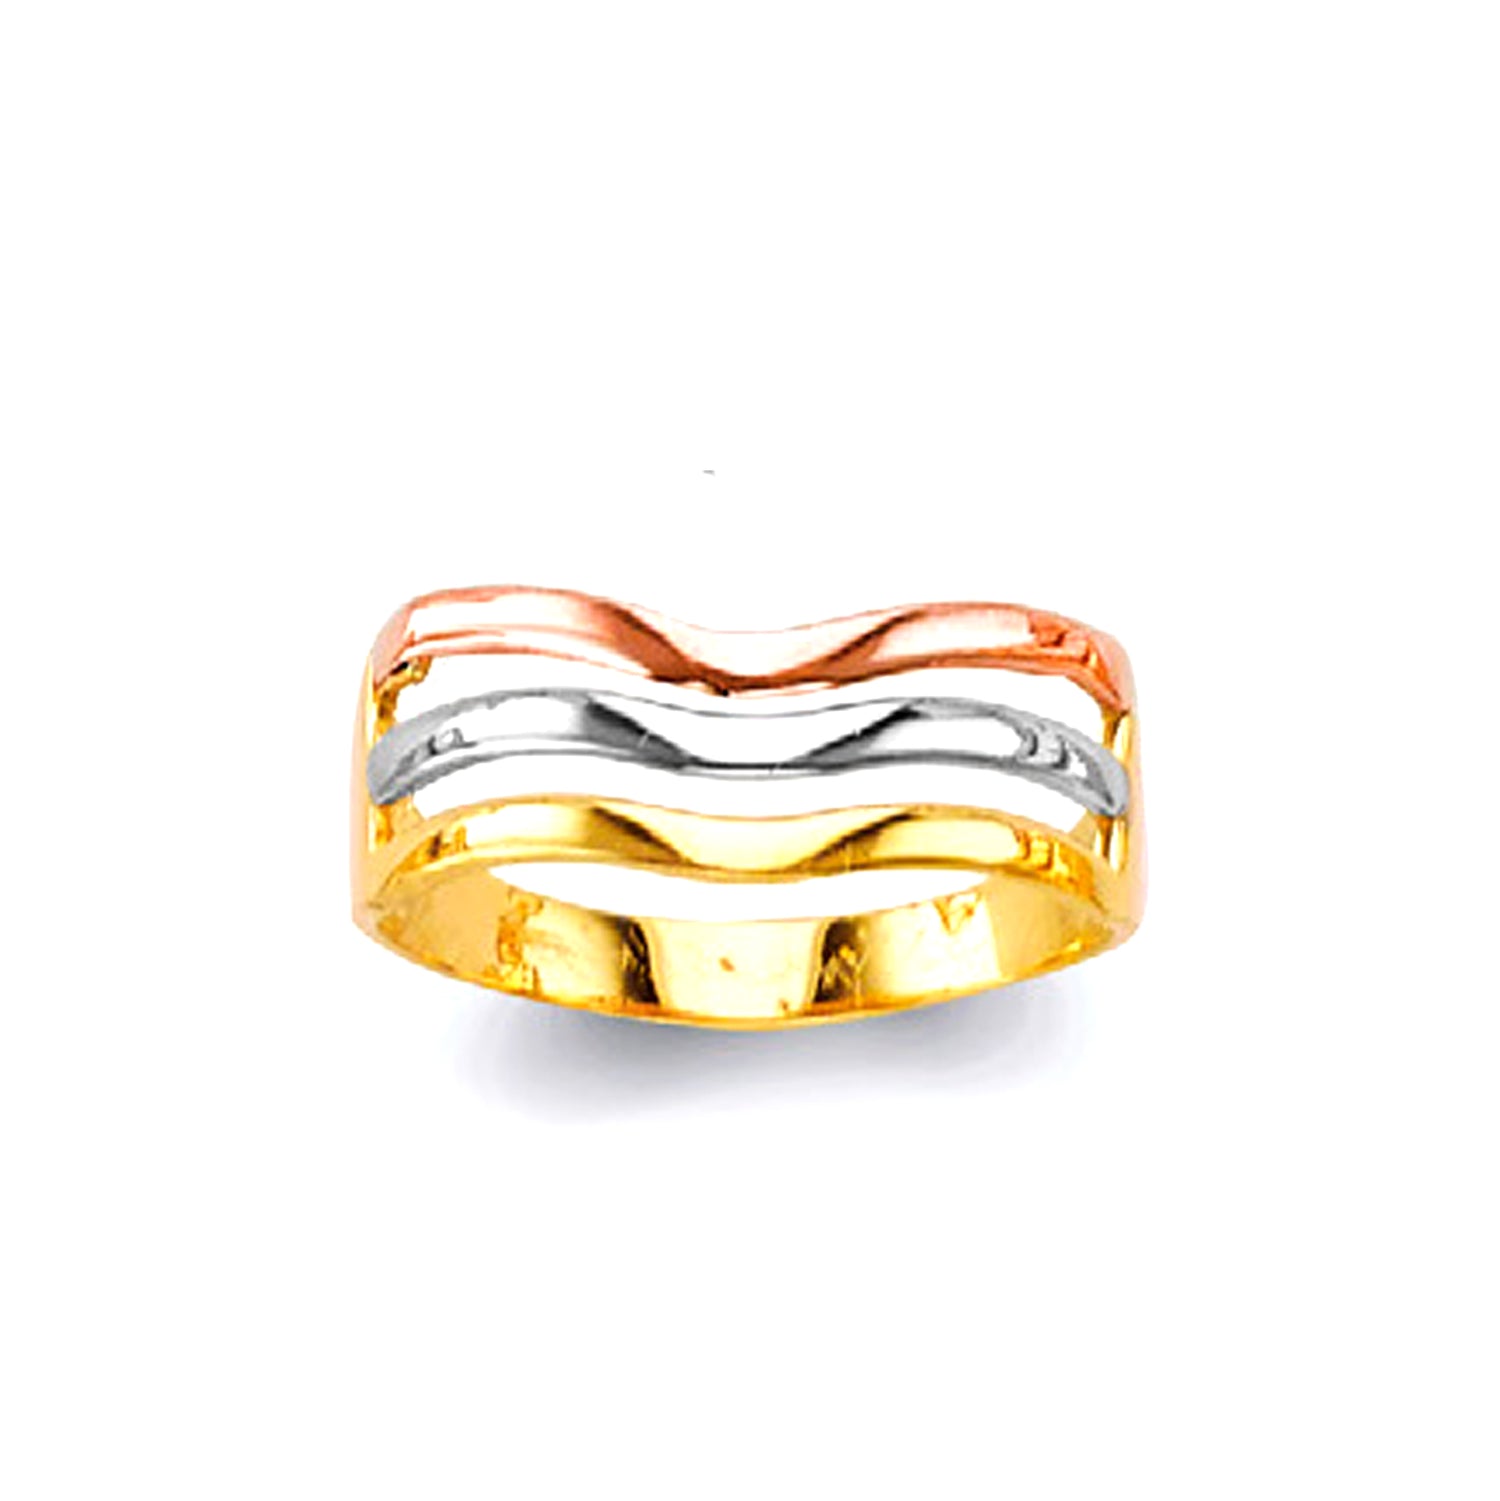 Designer Three-tone Wave Ring in Solid Gold